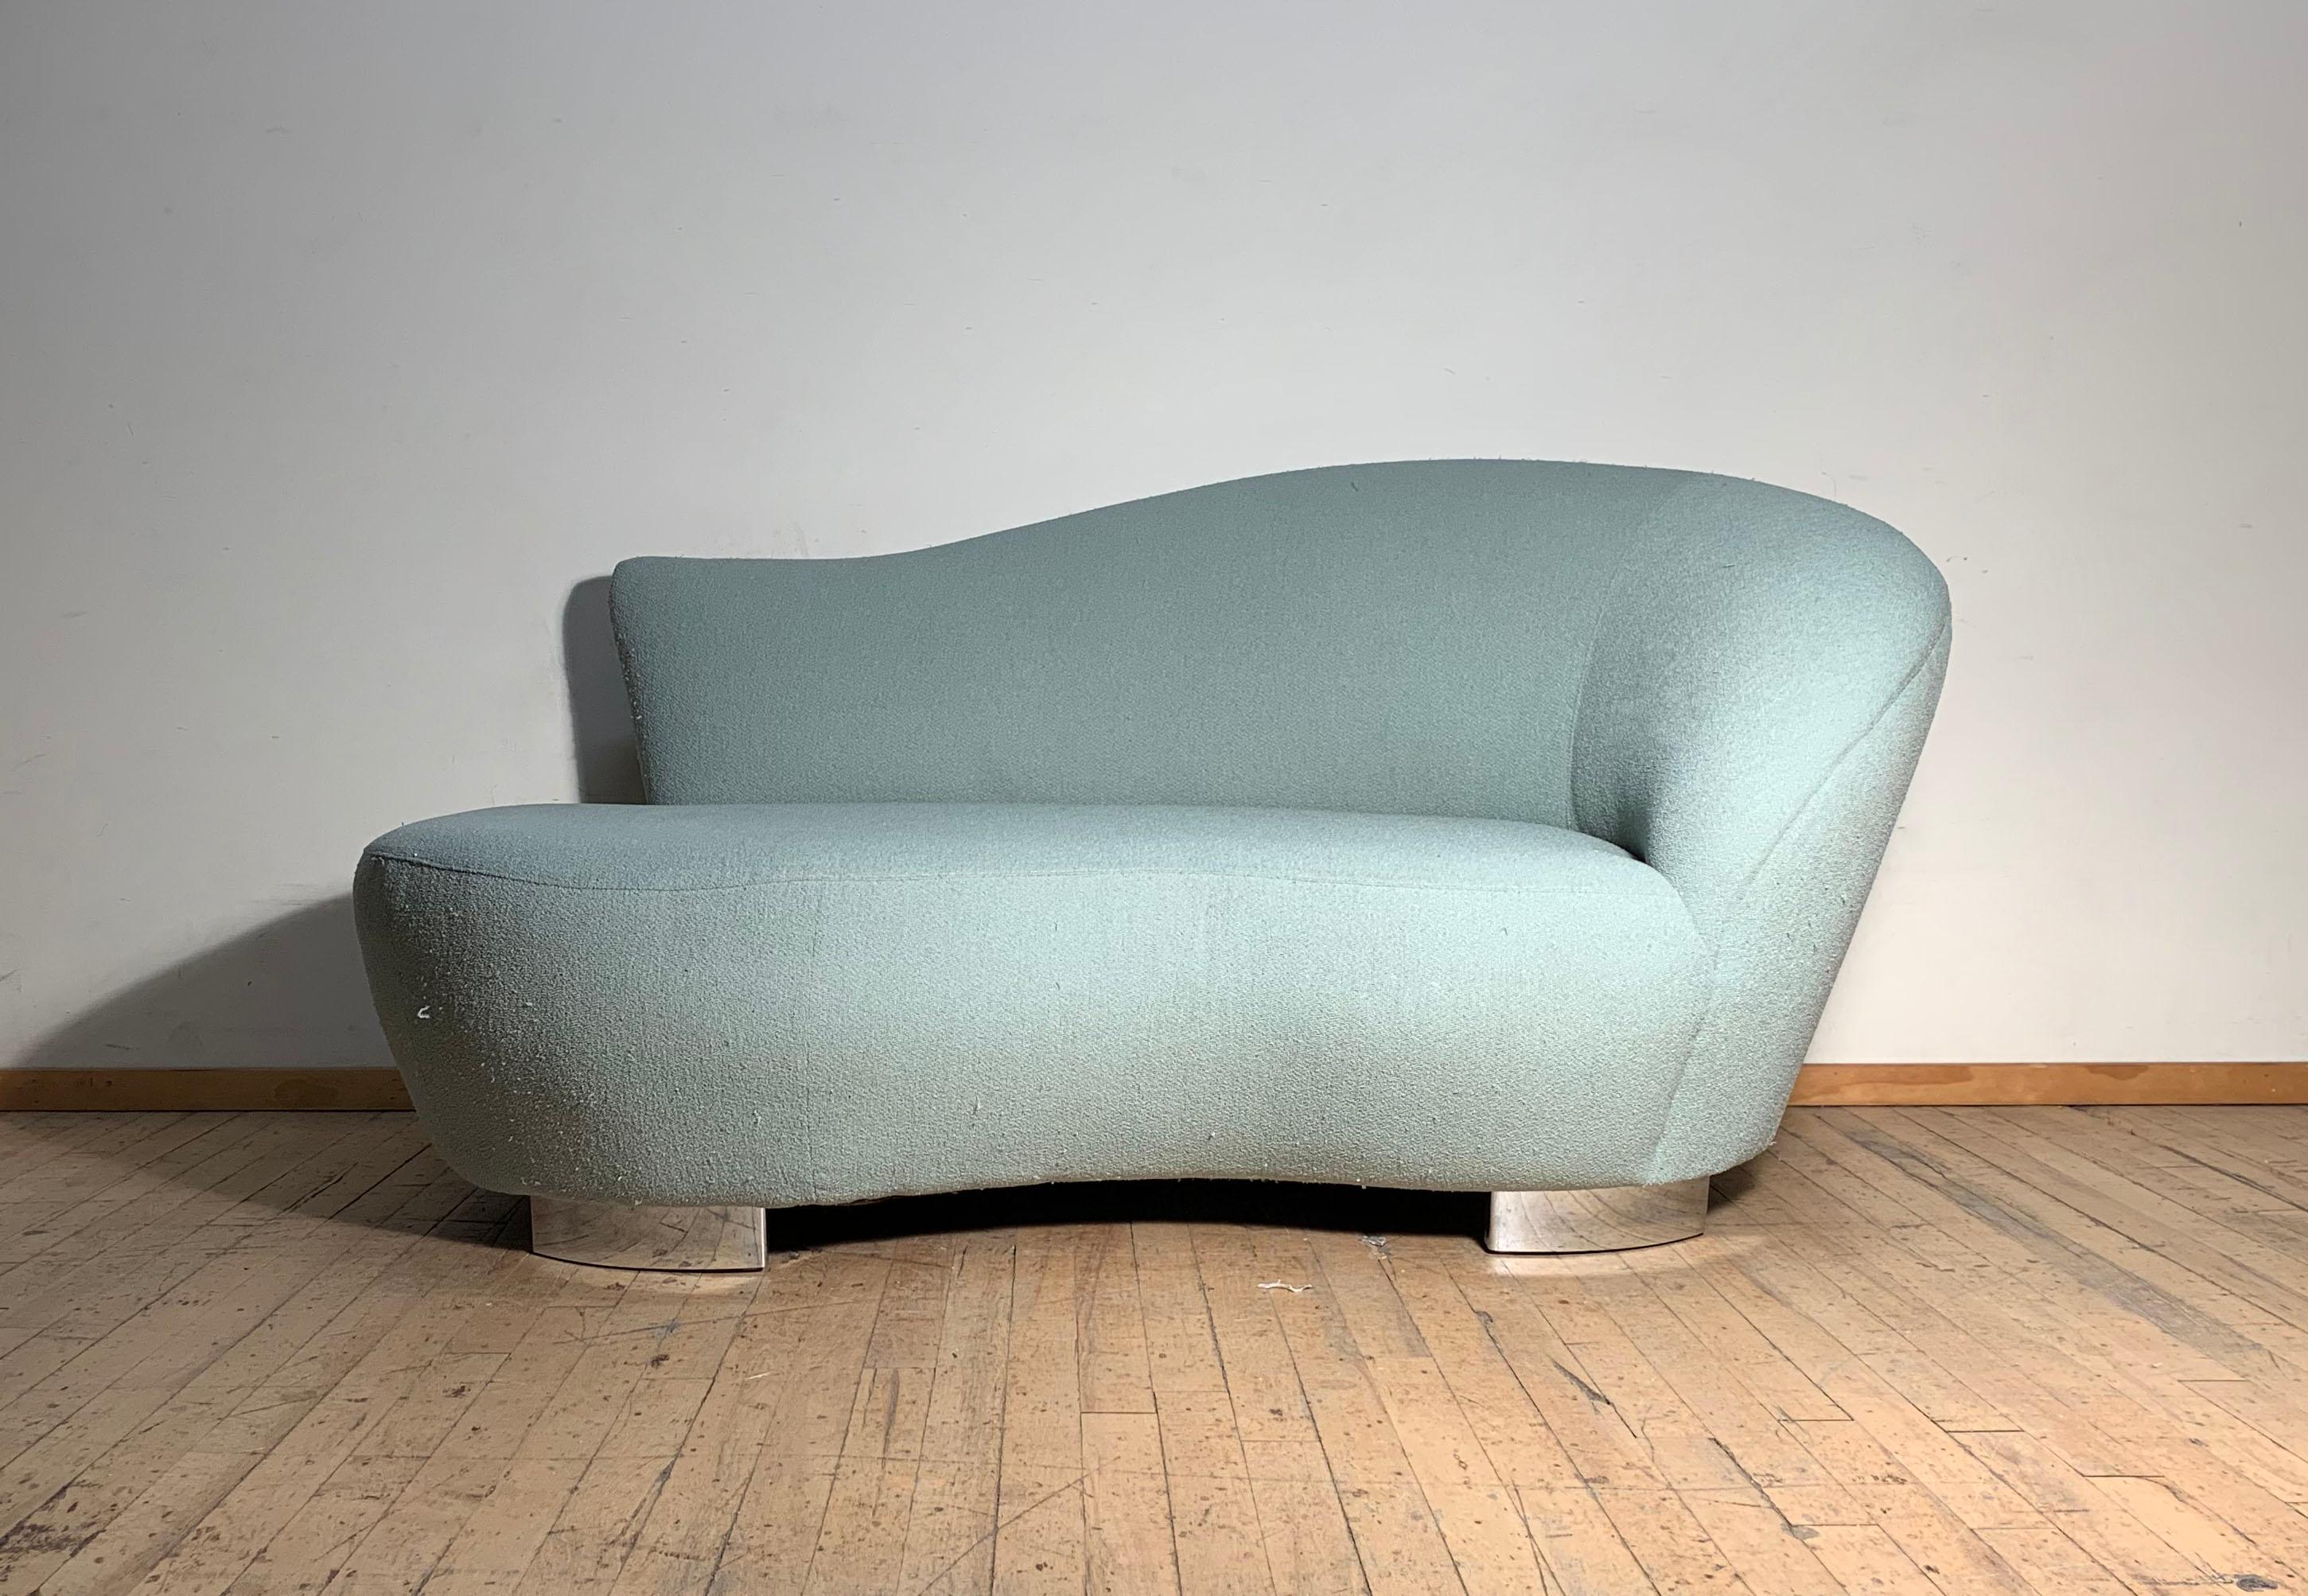 Petite love seat (loveseat) cloud sofa or chaise lounge
These are in quite nice vintage condition. The seafood green color fabric is original. Can still be used if desired for your interior. Just has some light fraying because of the type of fabric